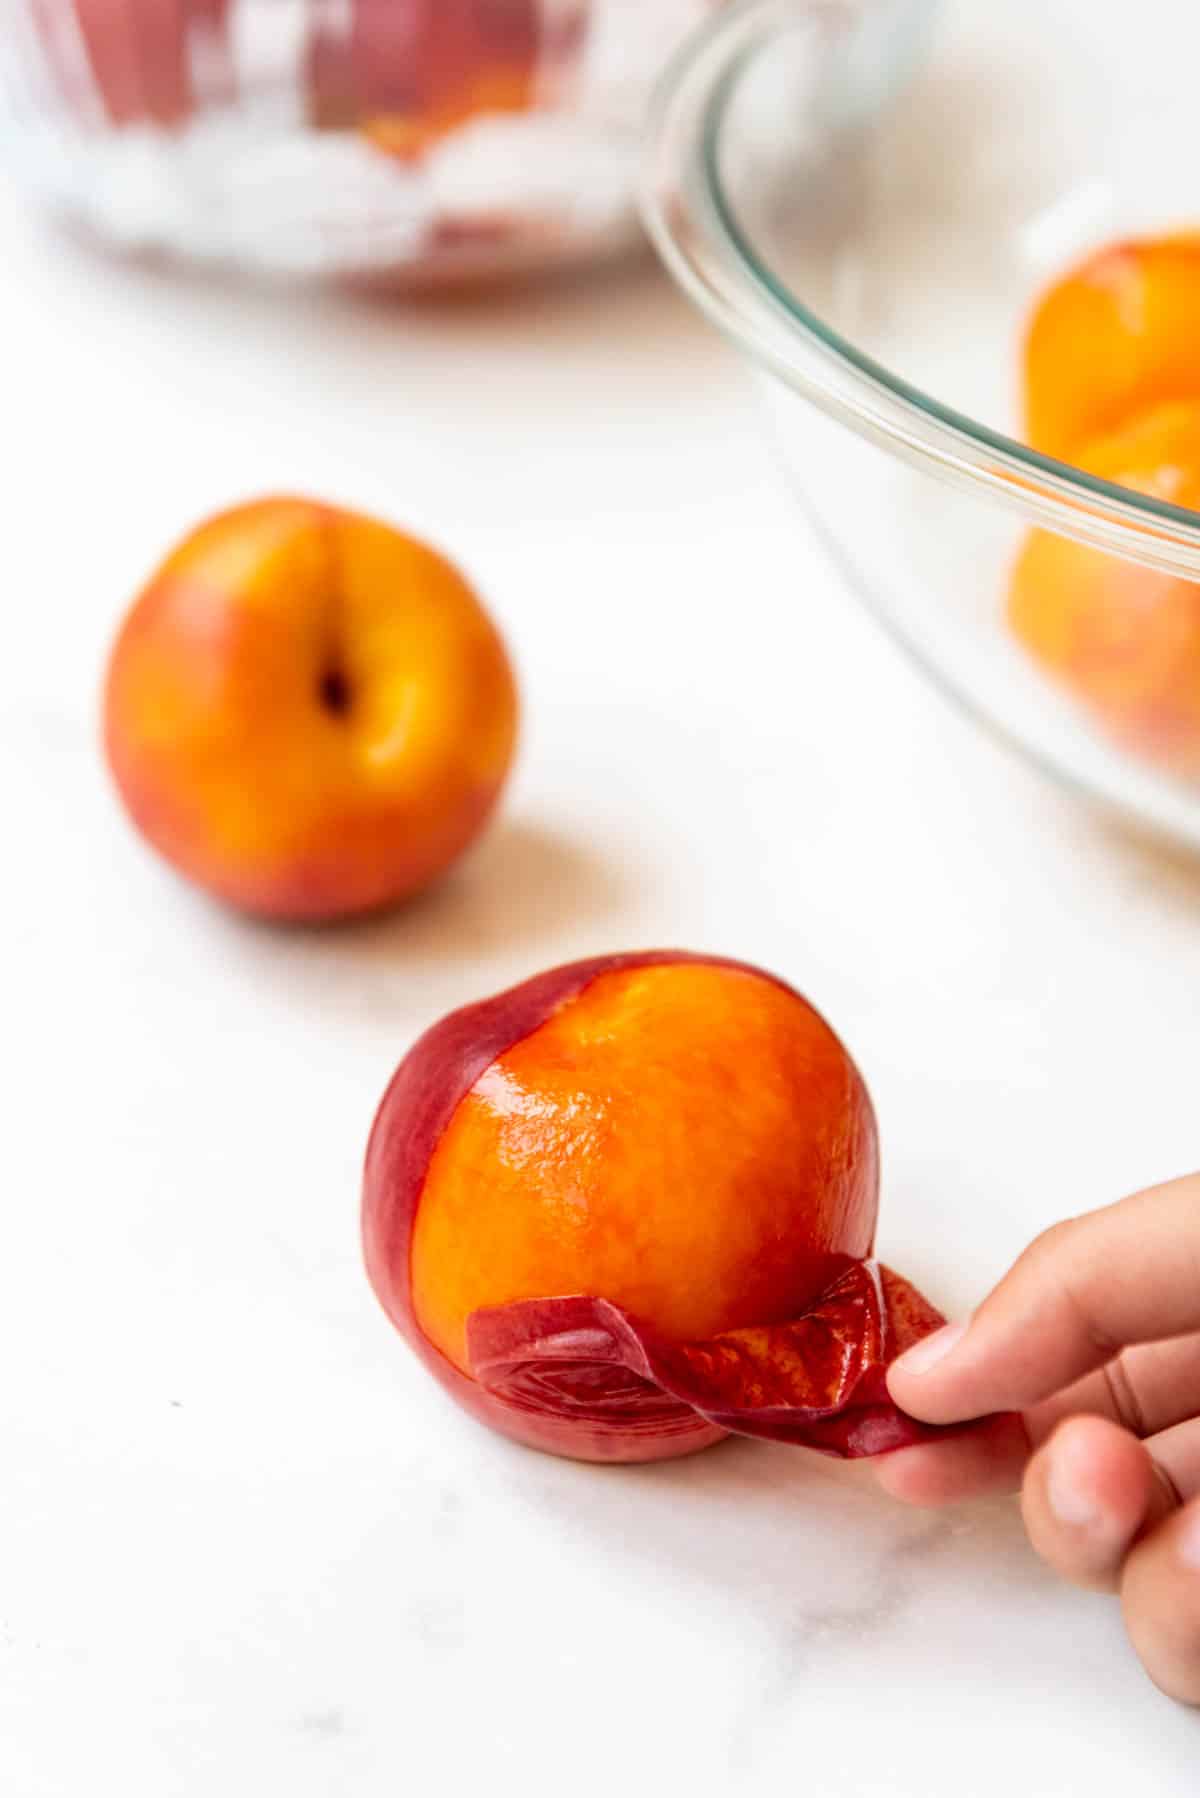 A hand showing the easy way to peel peaches after boiling them for 30 seconds, then placing them in an ice water bath.